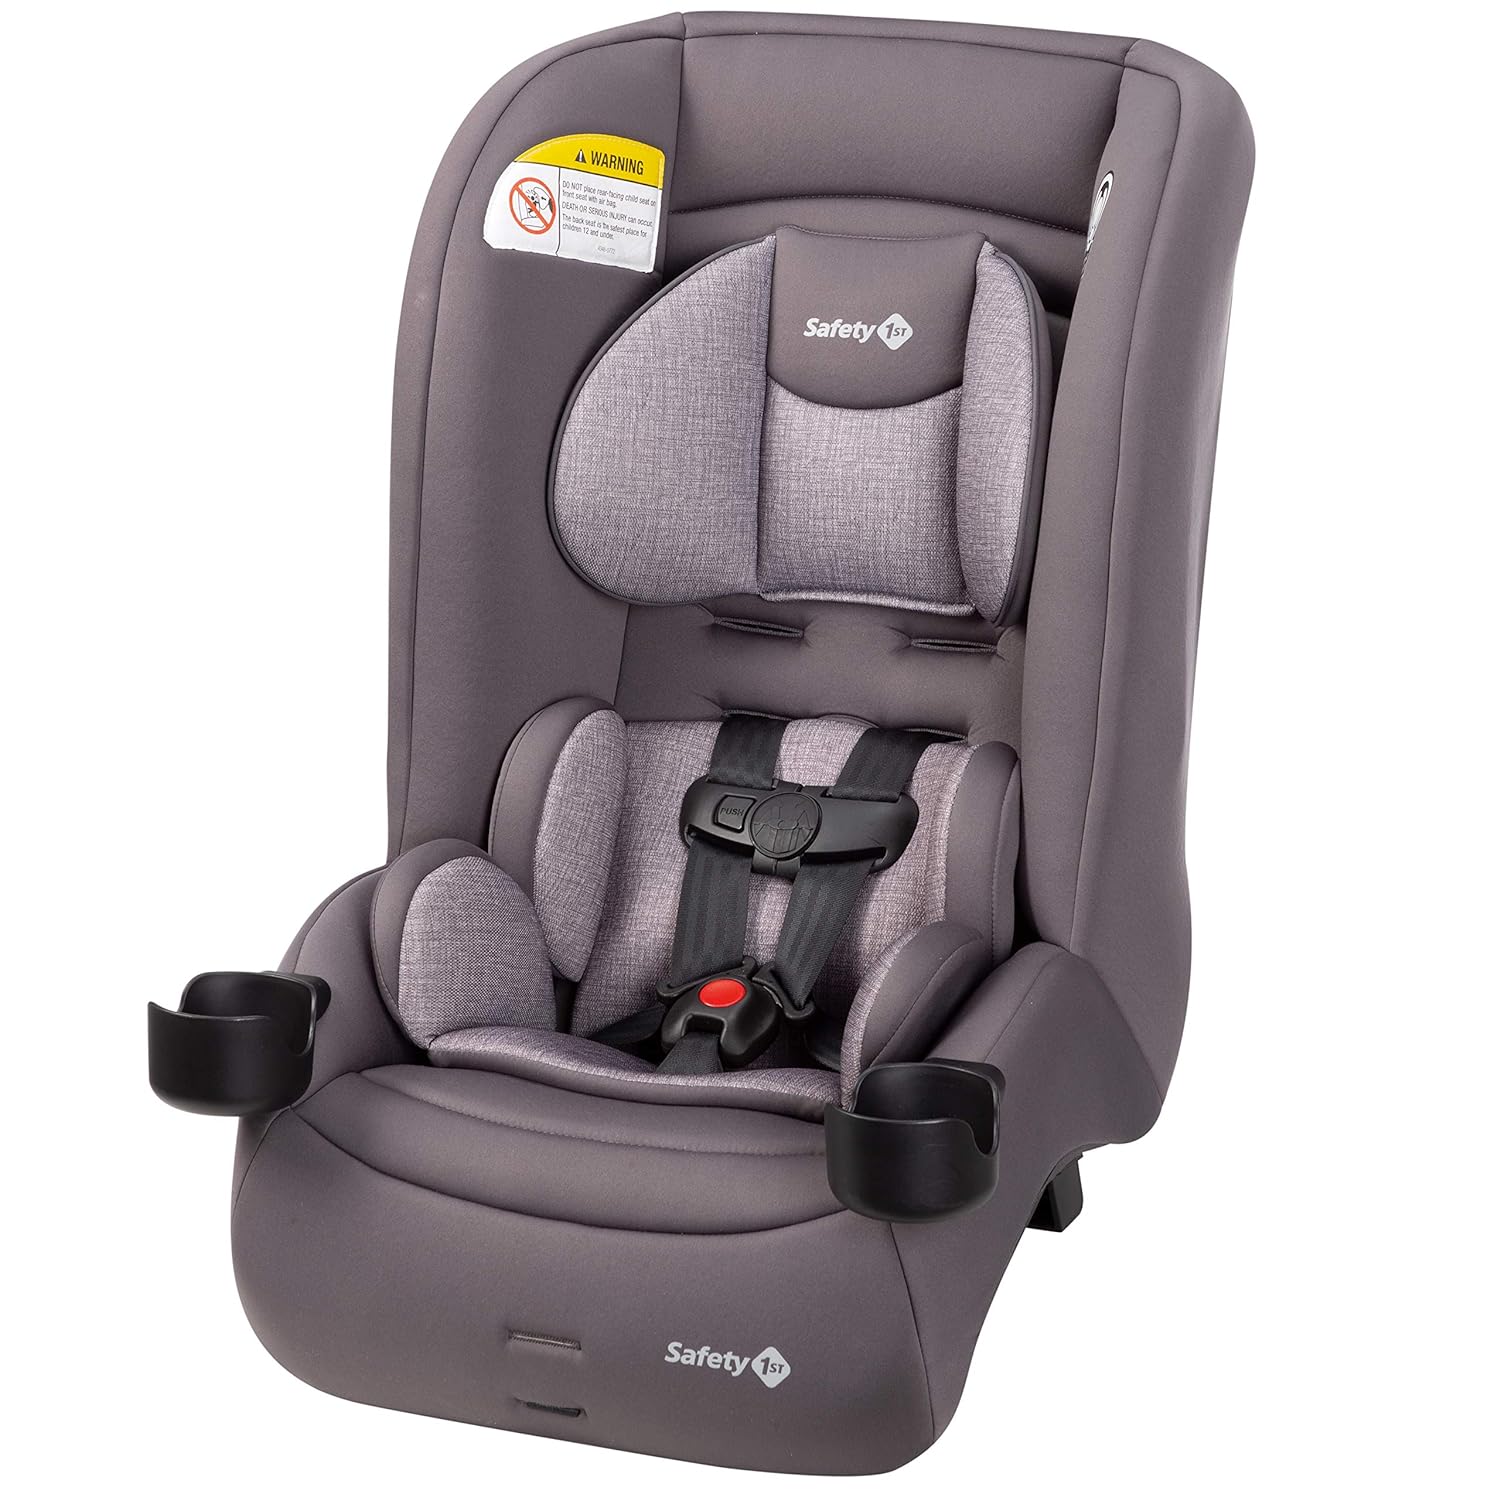 Safety 1st Jive 2-in-1 Convertible Car Seat.